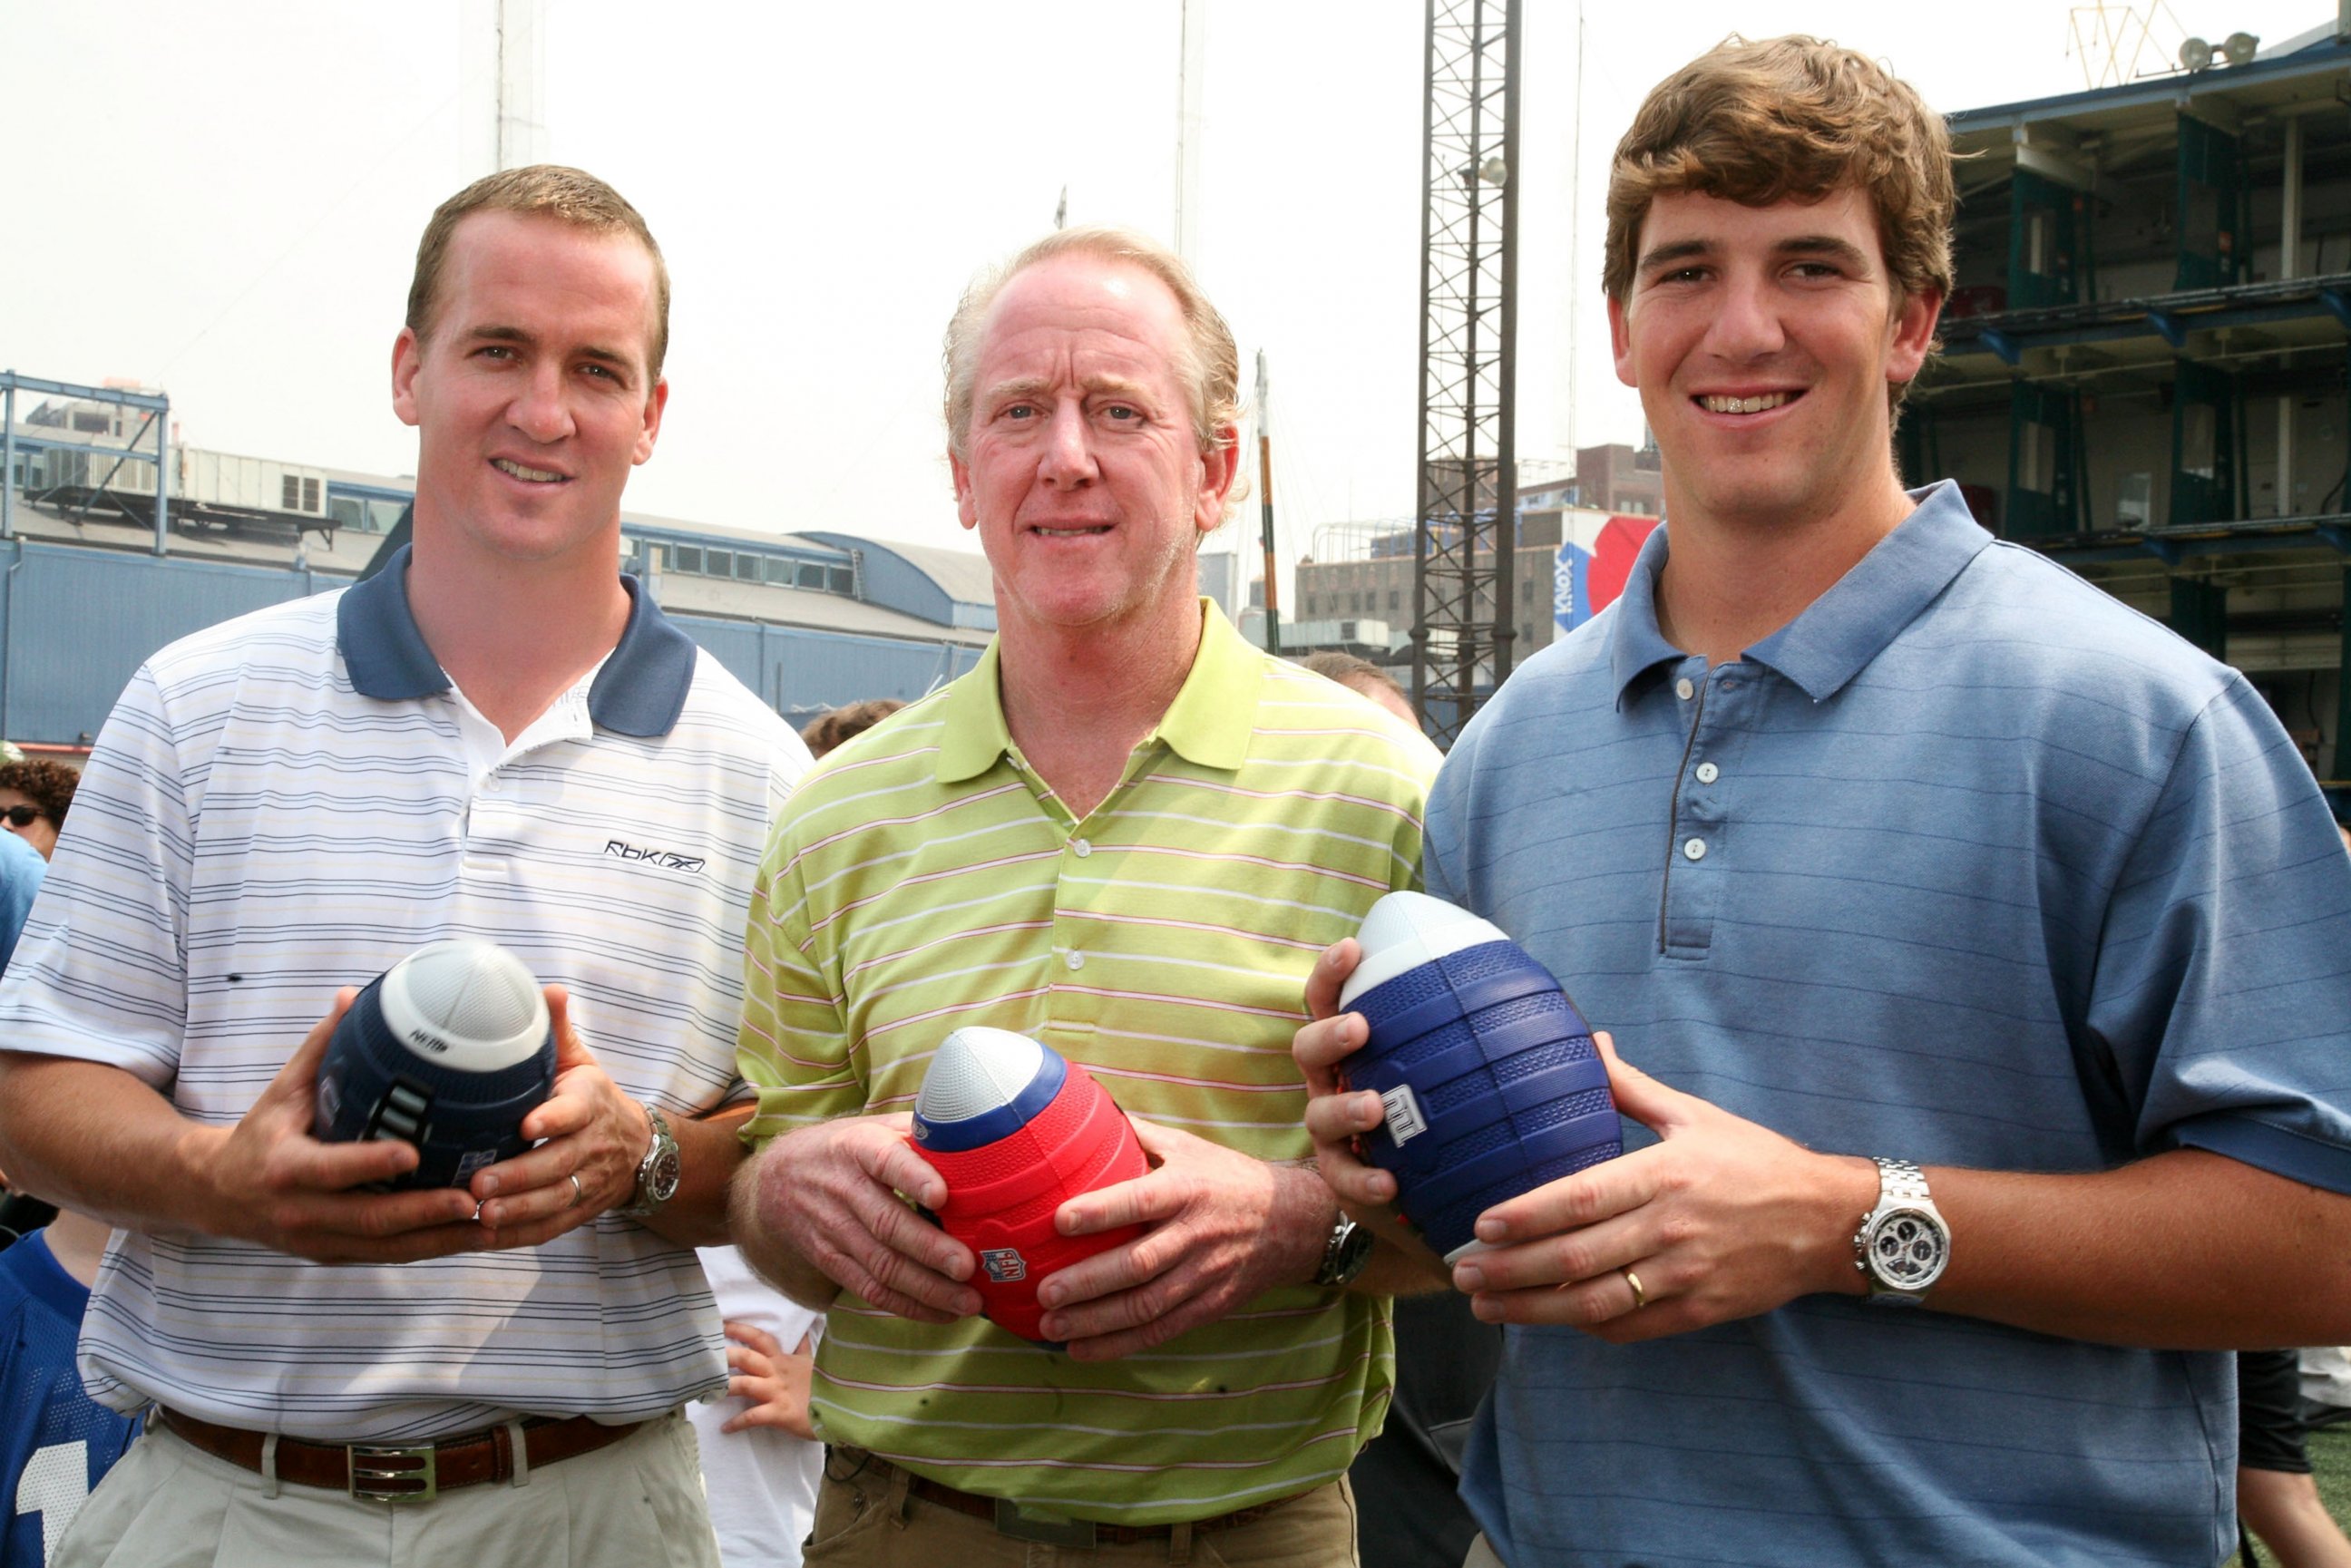 PHOTO: Indianapolis Colts quarterback Peyton Manning, Archie Manning and New York Giants quarterback Eli Manning attends the NERF Father's Day Football Throwdown on June 14, 2008 at Chelsea Piers in New York City.